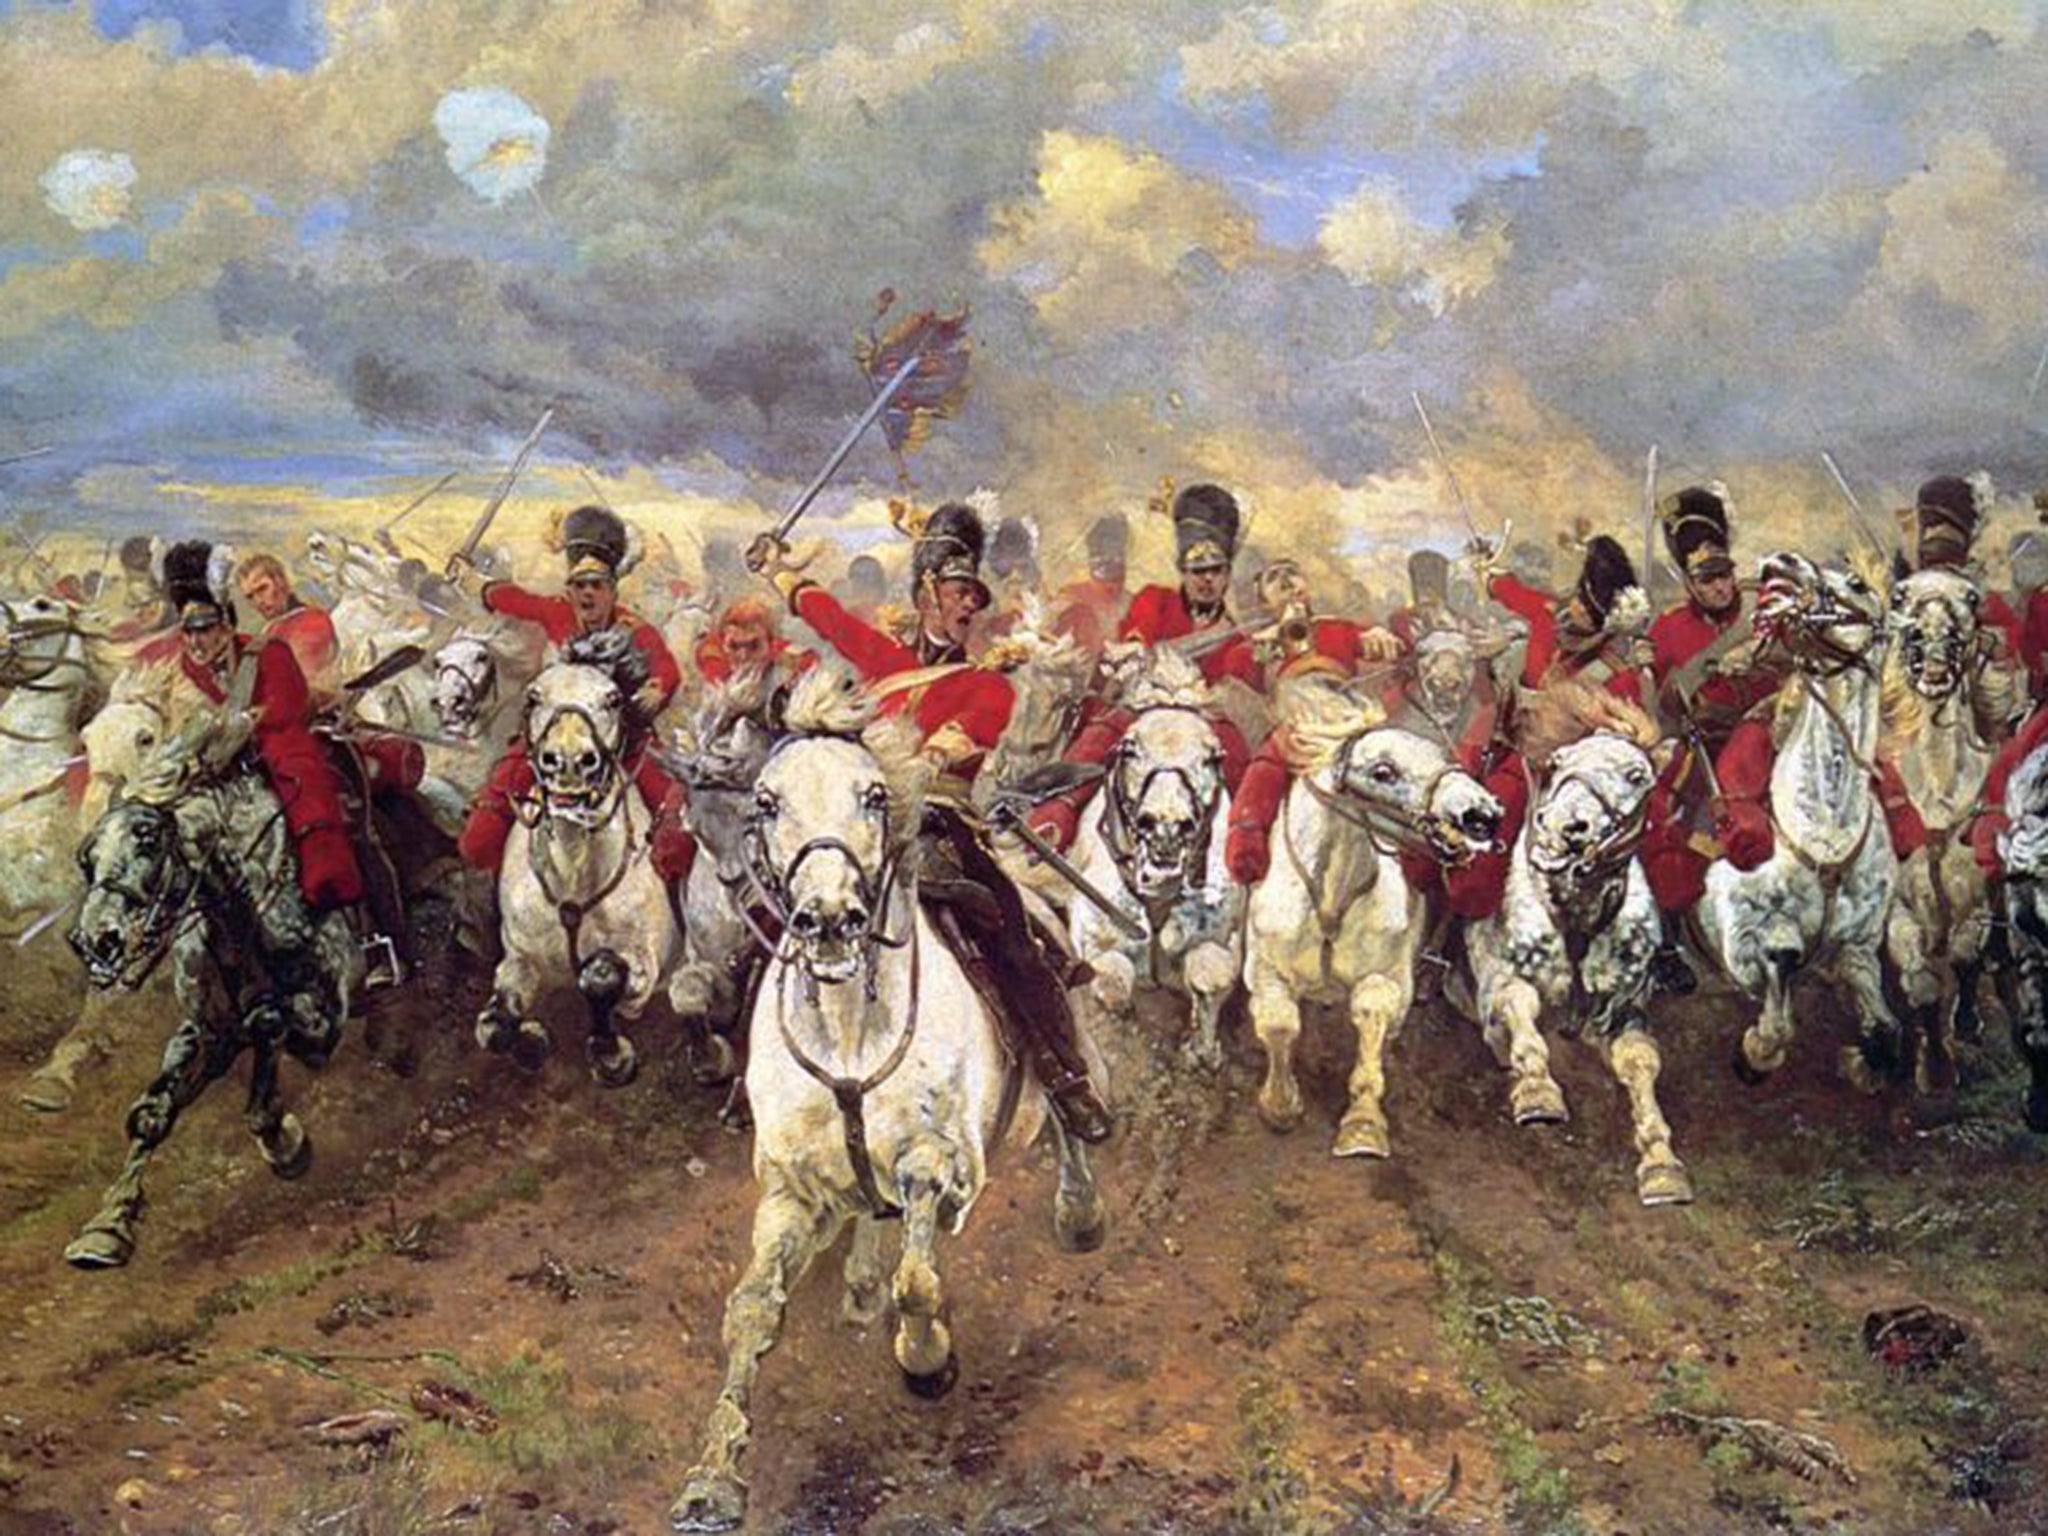 Lady Butler’s painting Scotland Forever! – the Greys actually advanced at the trot because of the broken ground